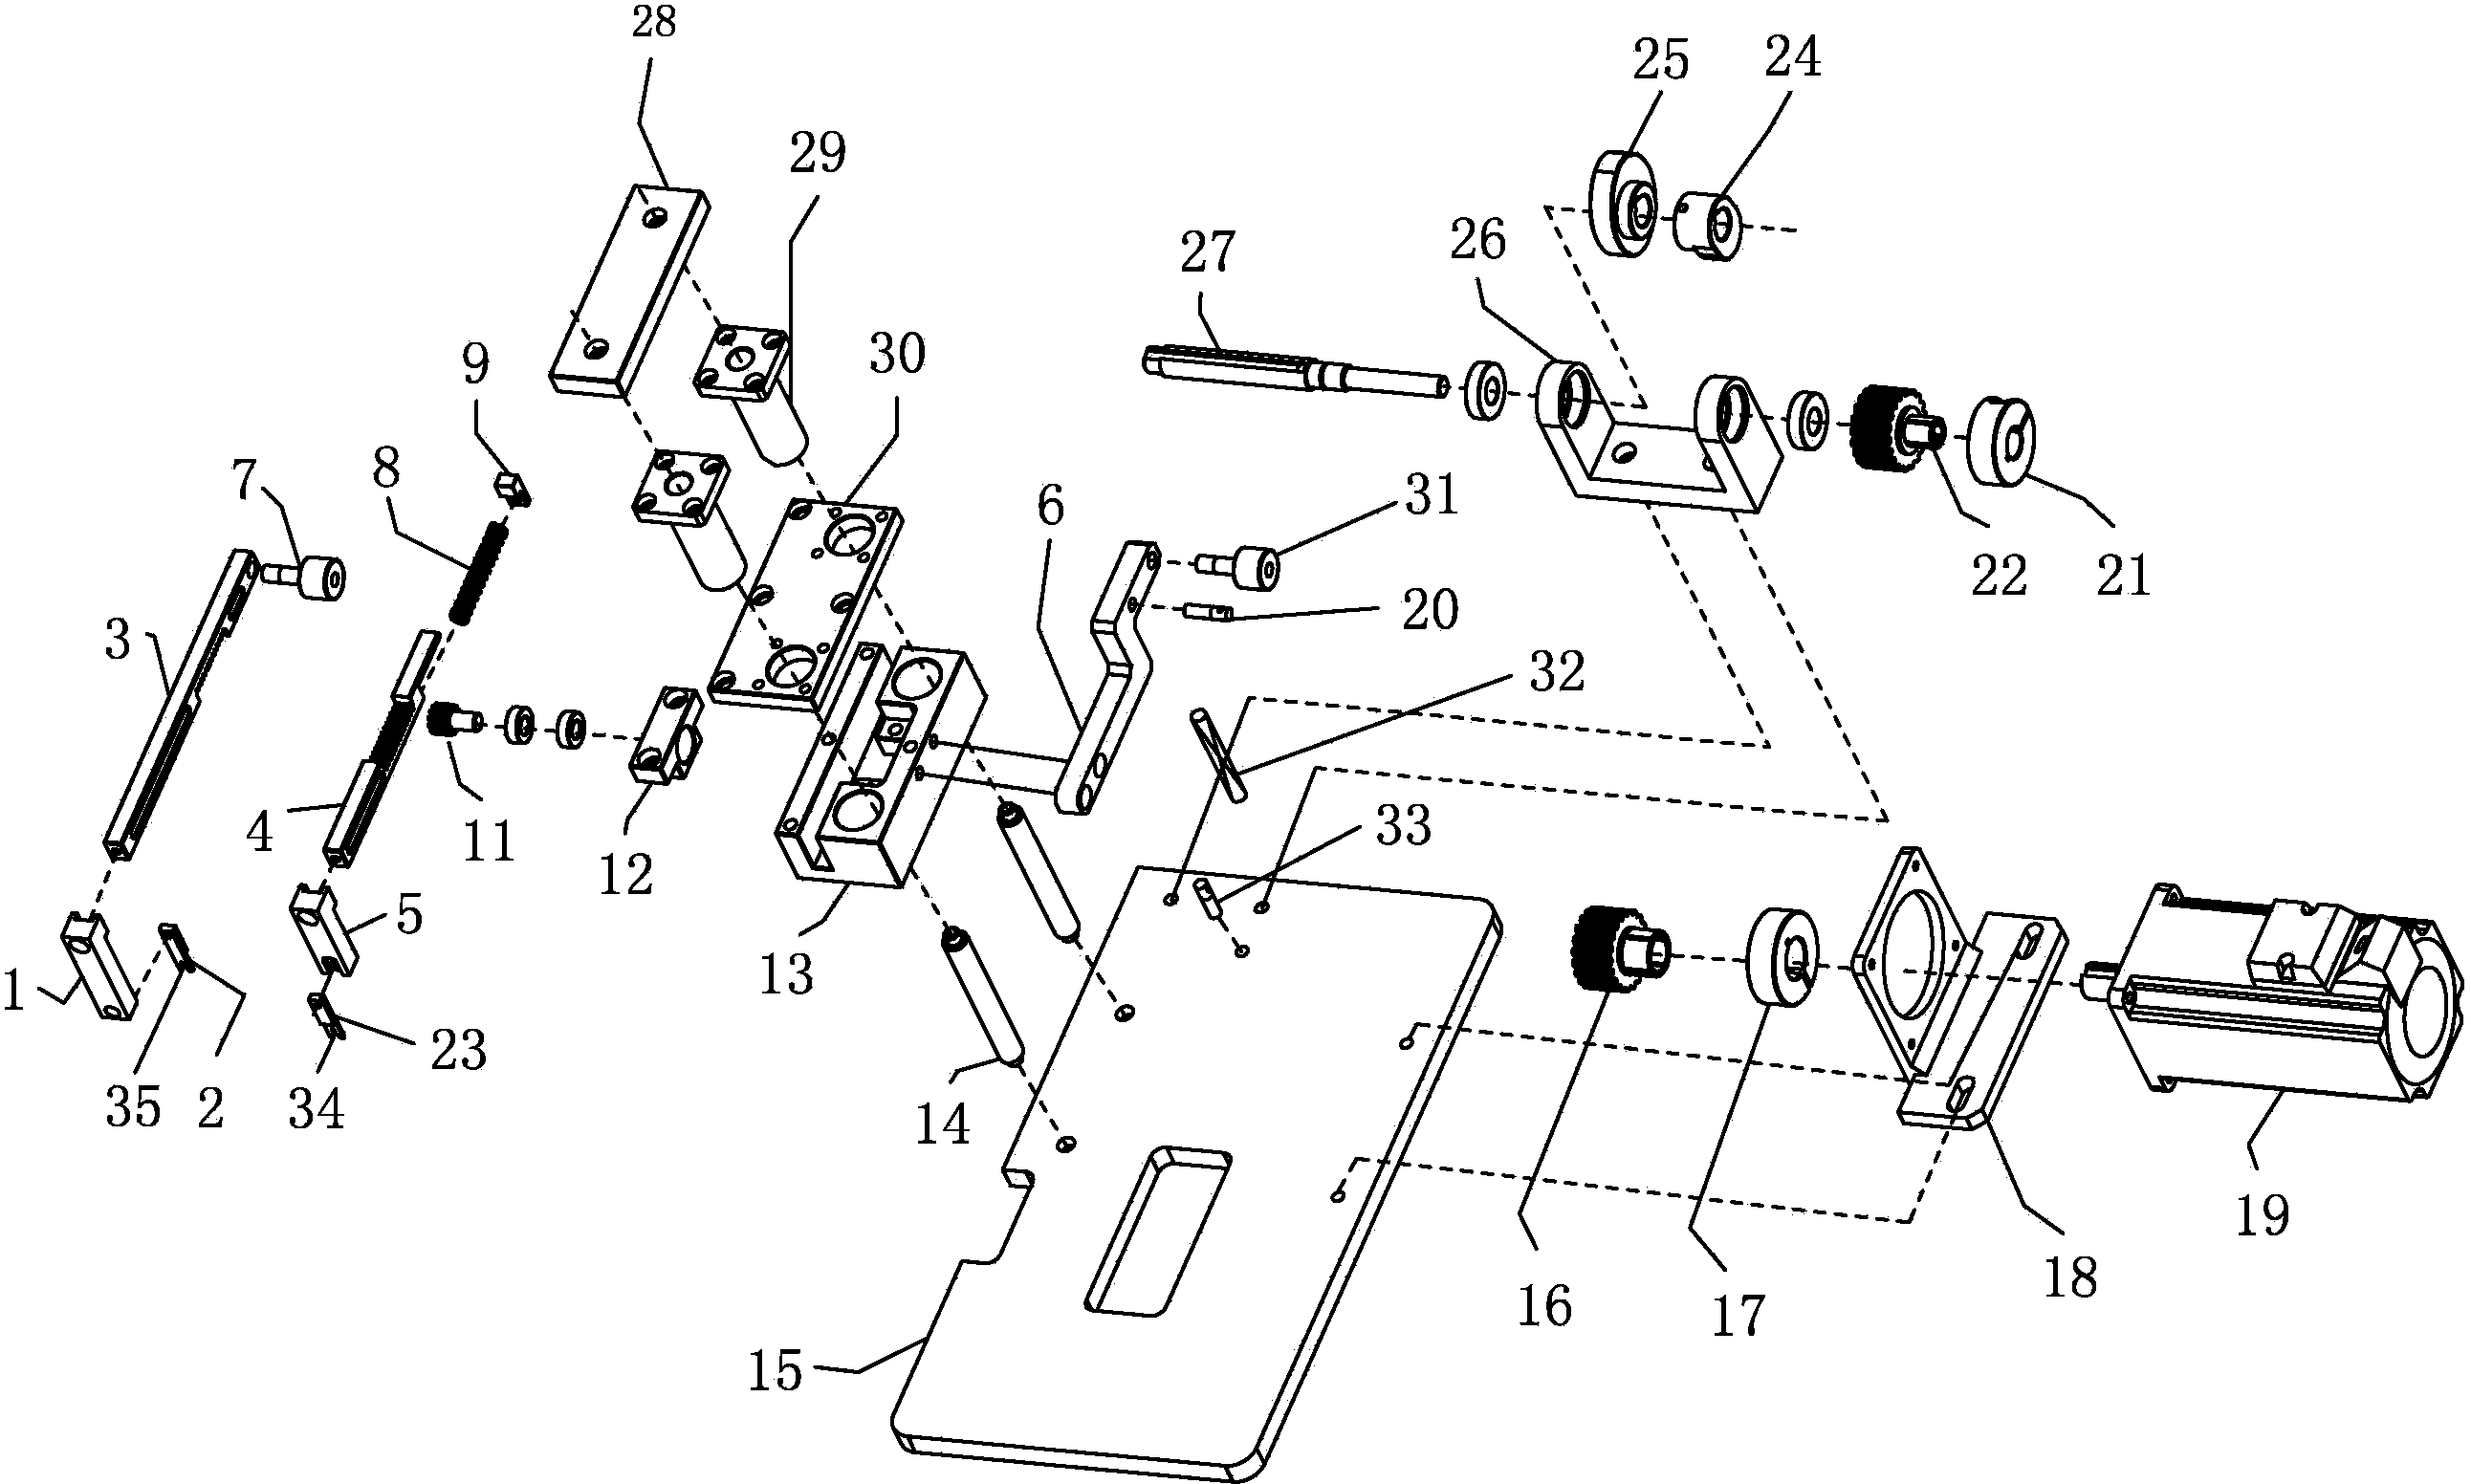 Element centering device of component inserter